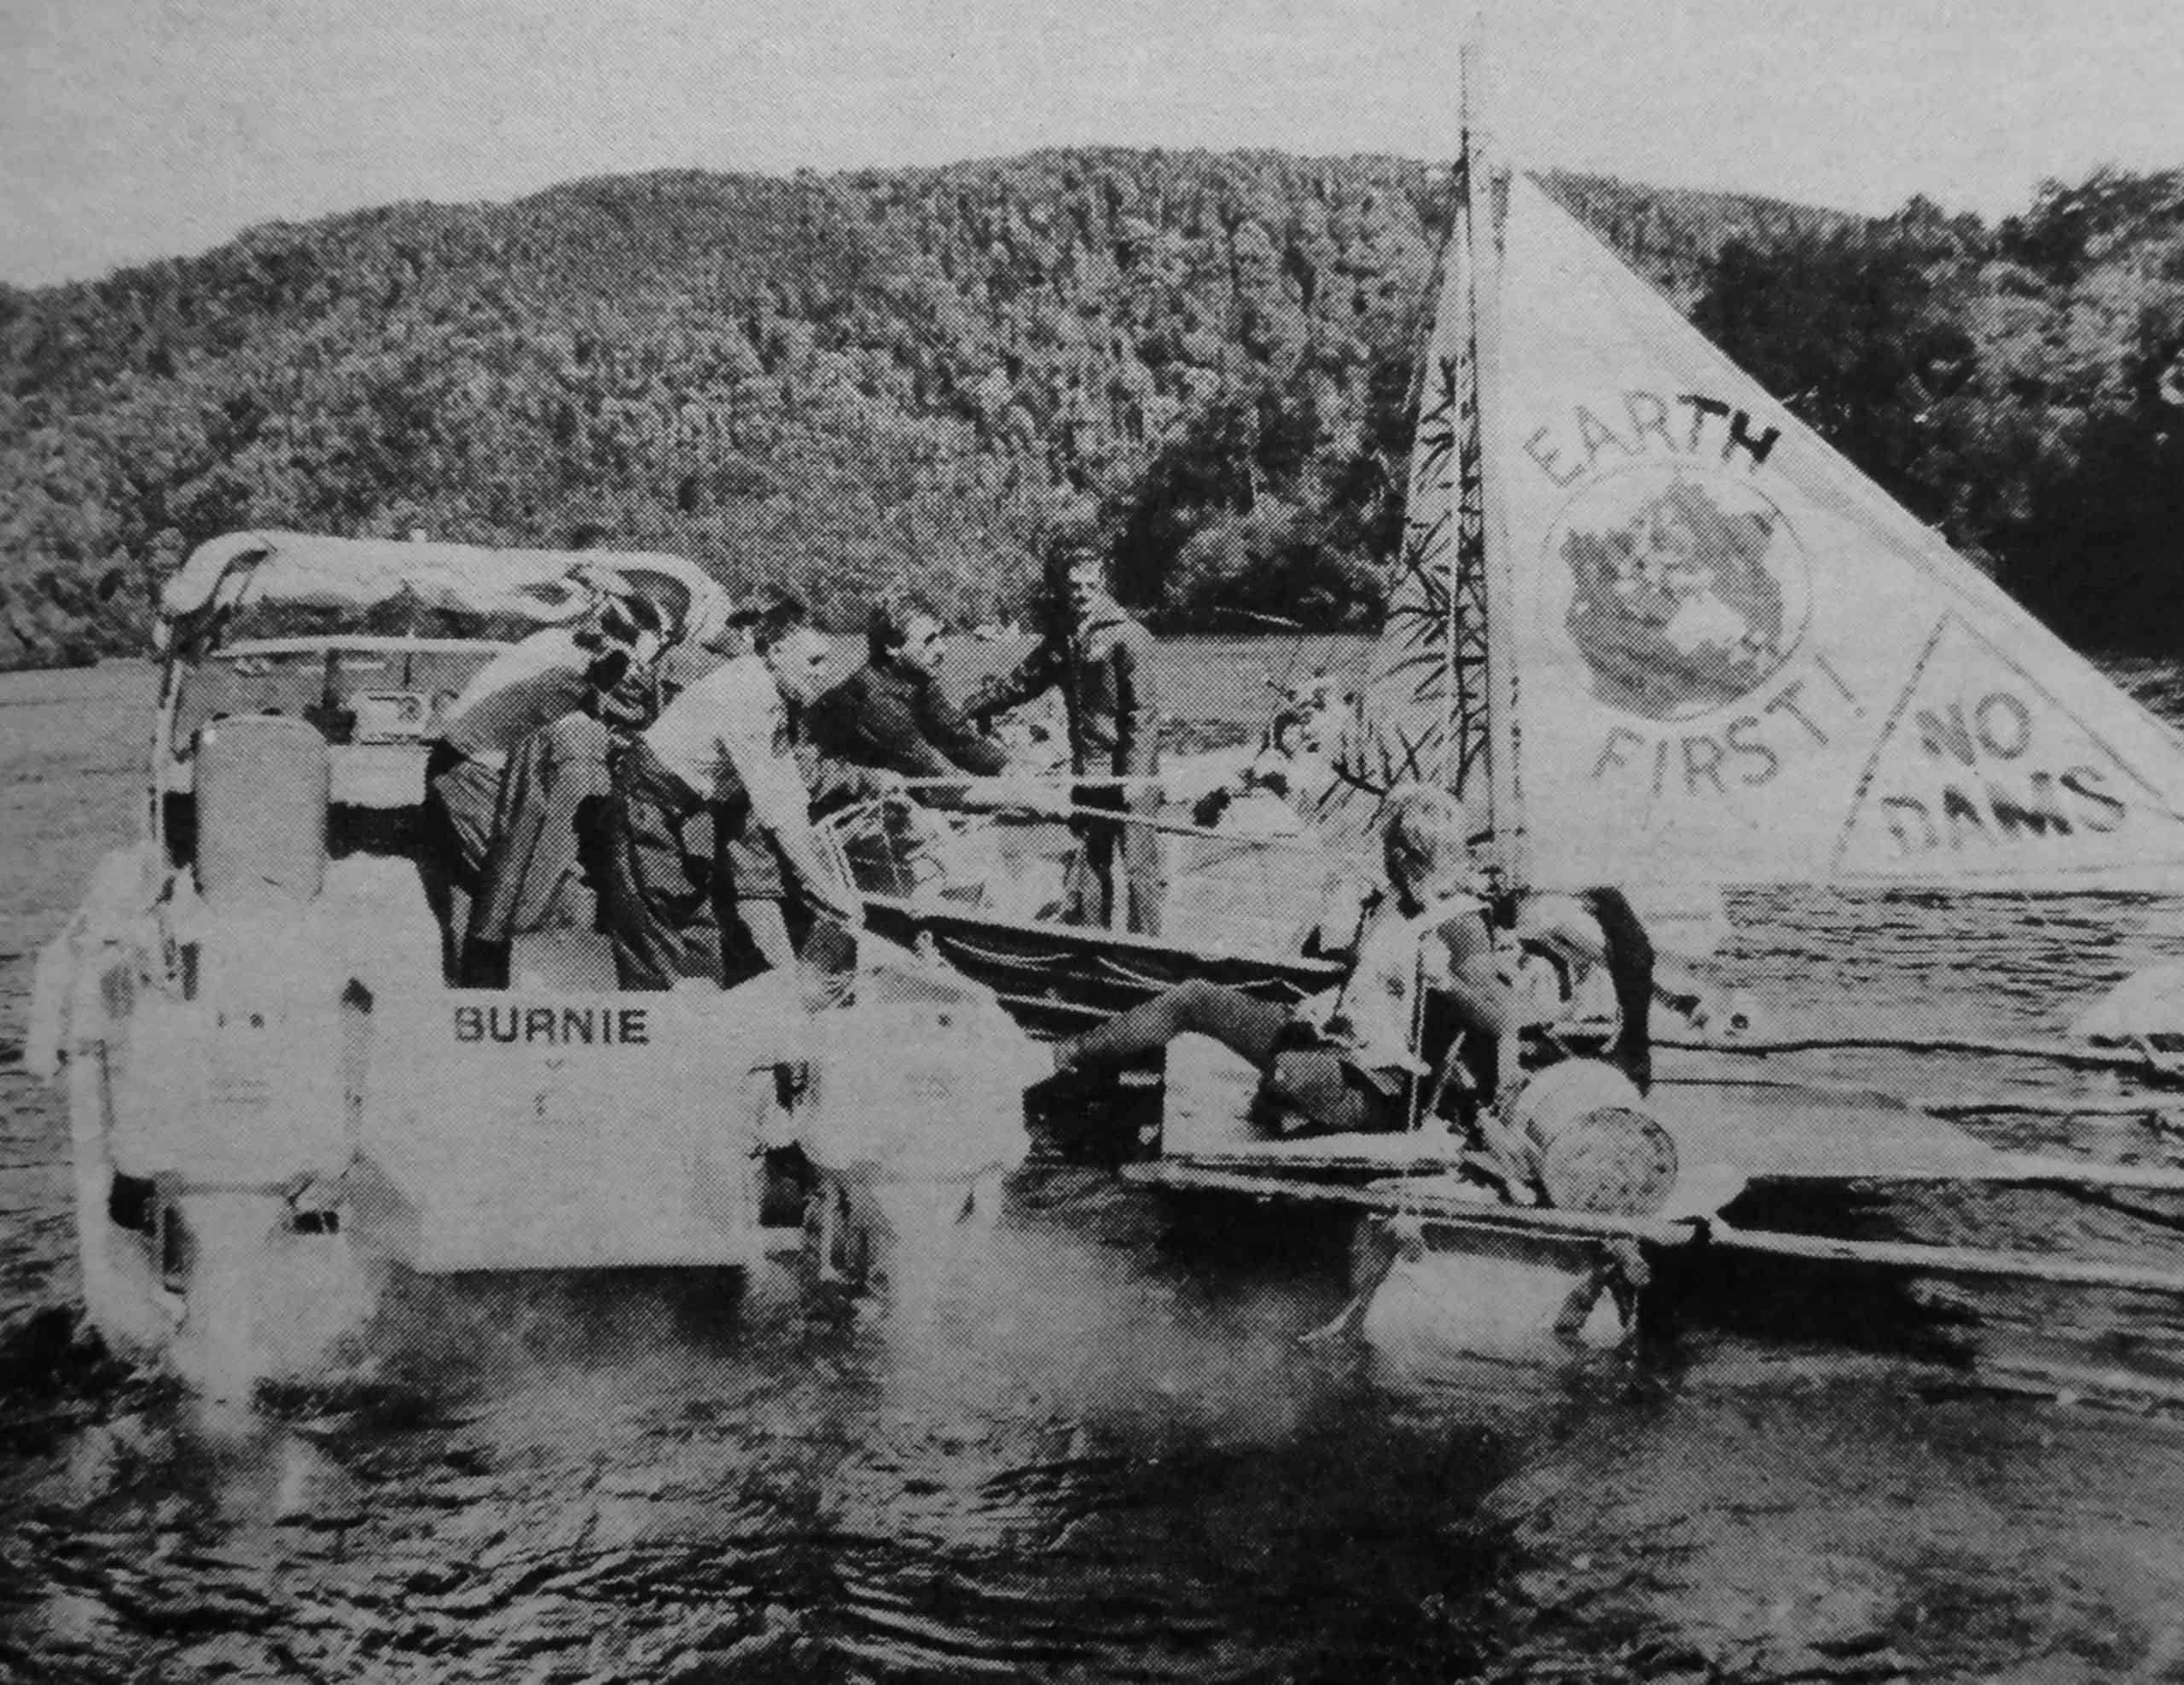 Three boats on a river. Two speedboats with police trying to stop the third sailing boat with protestor. The sail says Earth First and No Dams.